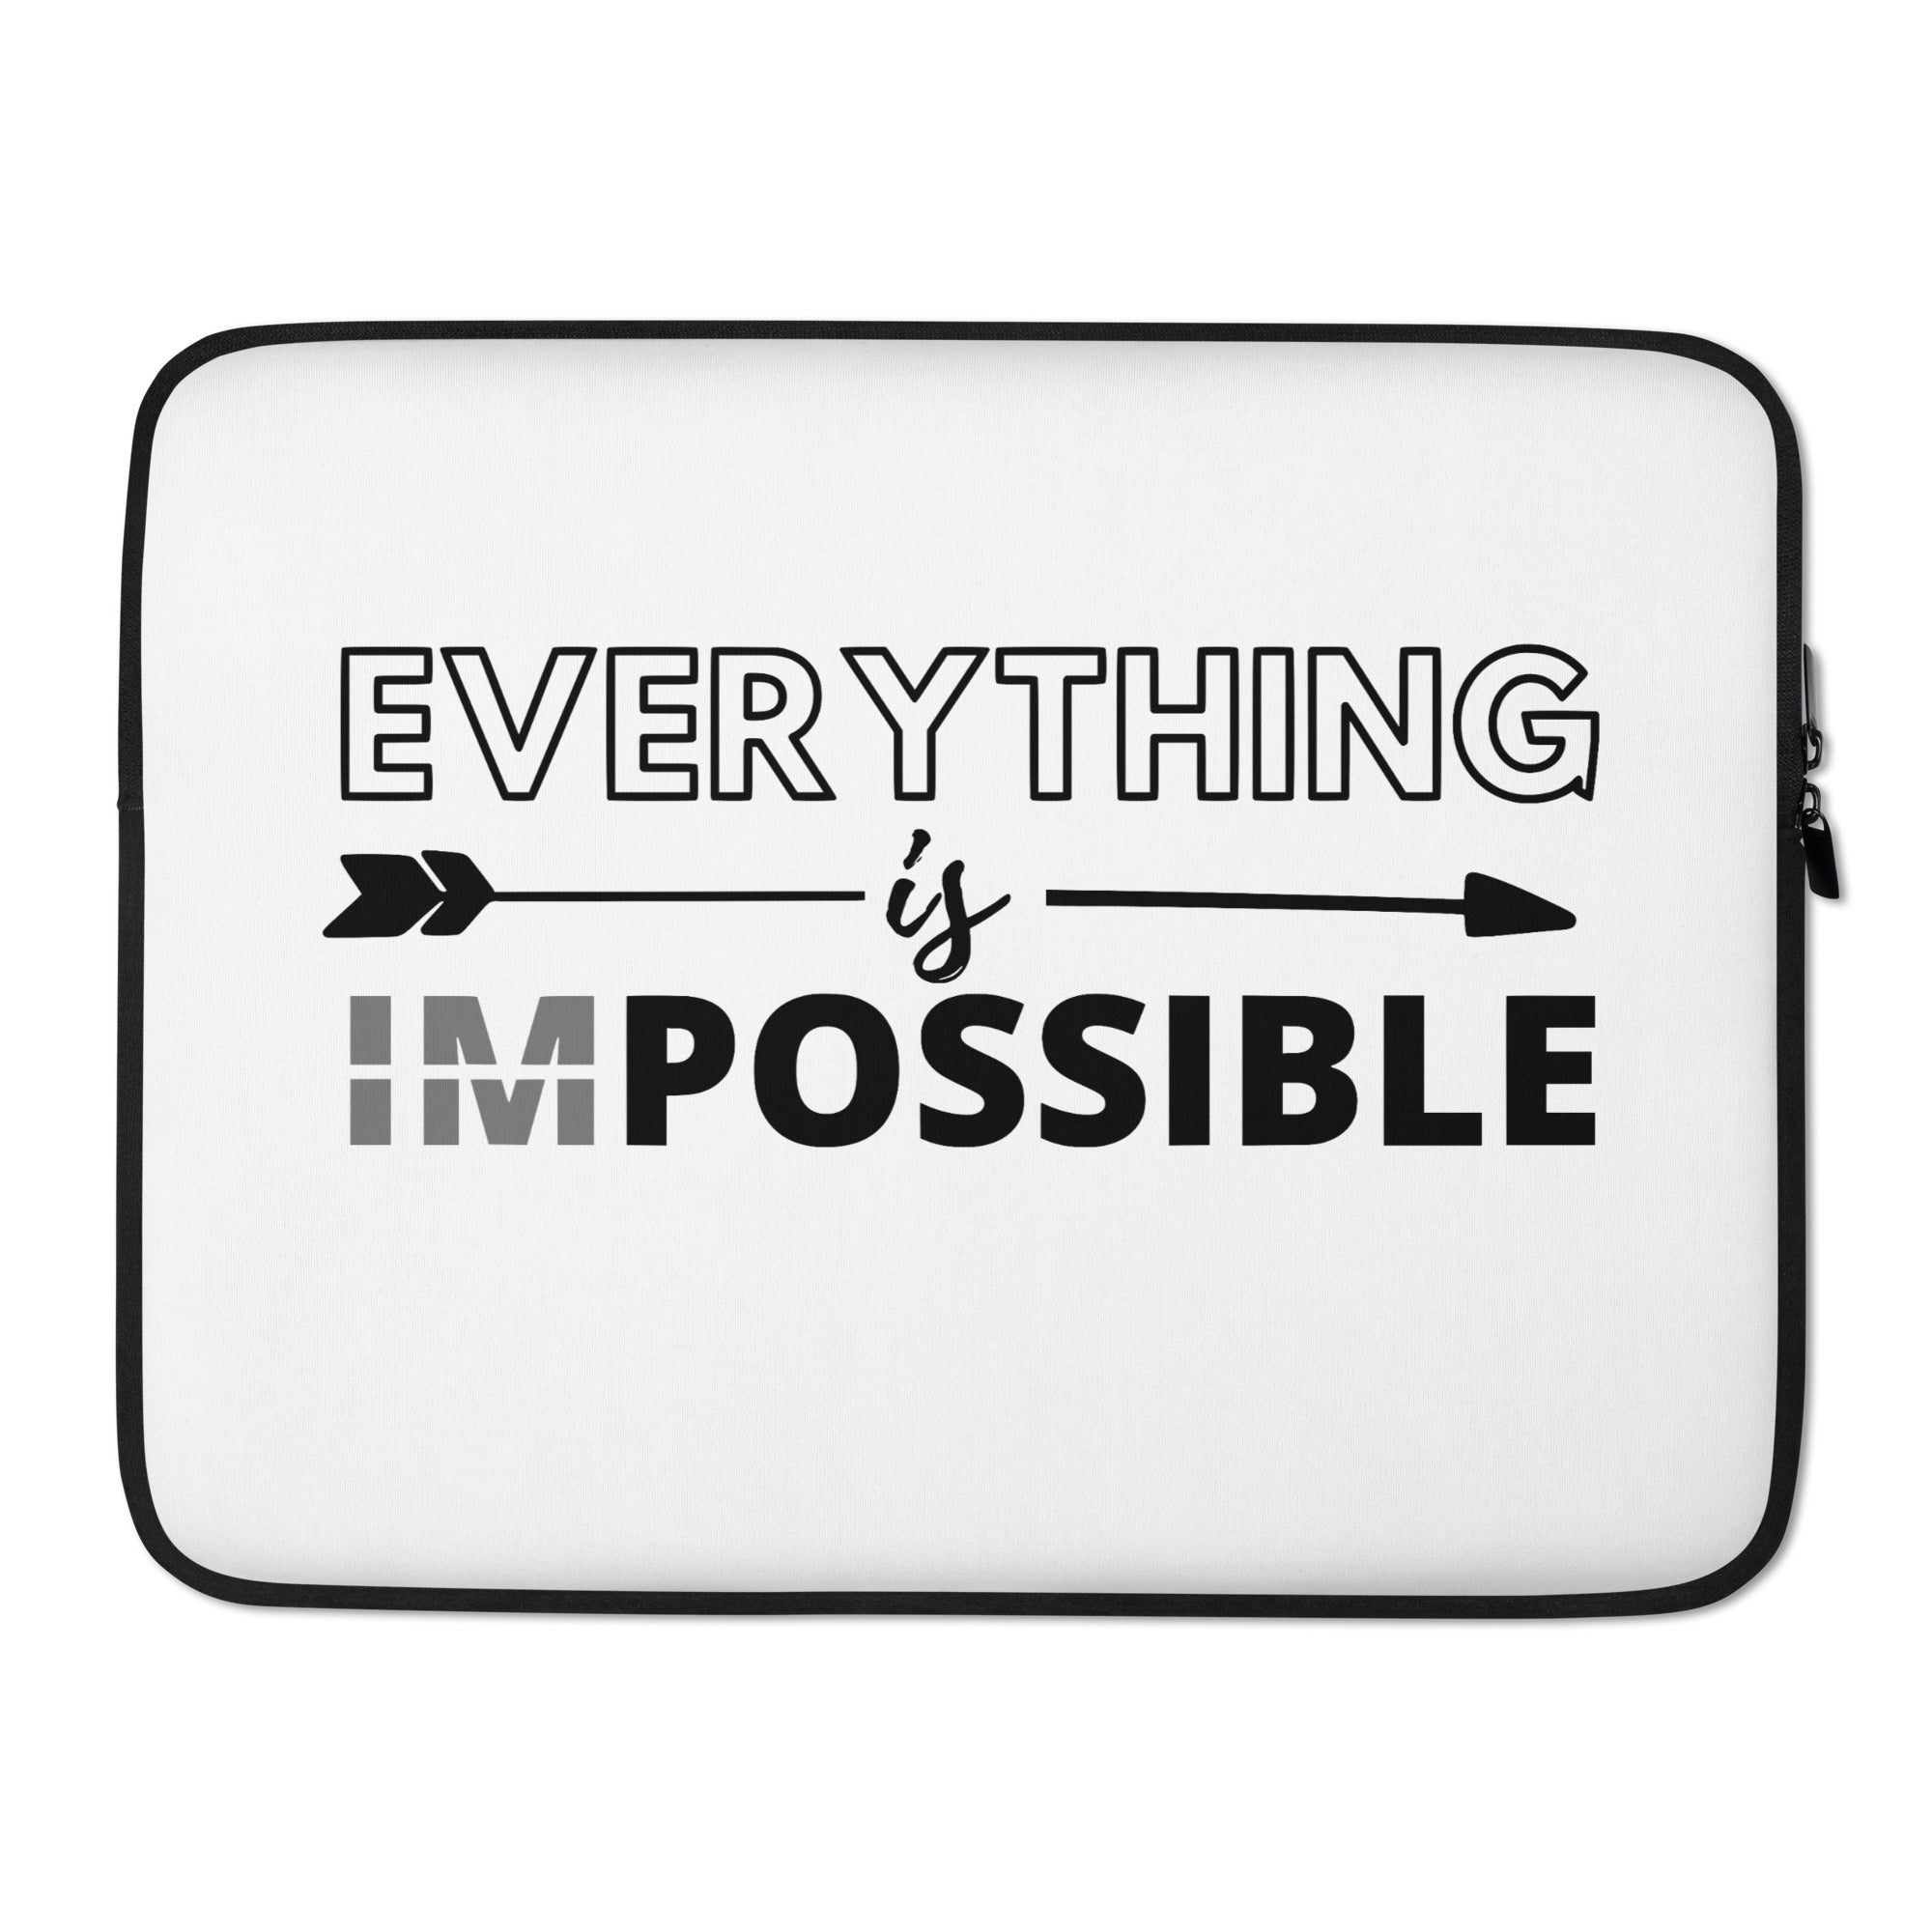 Everything Is Possible - Laptop Sleeve